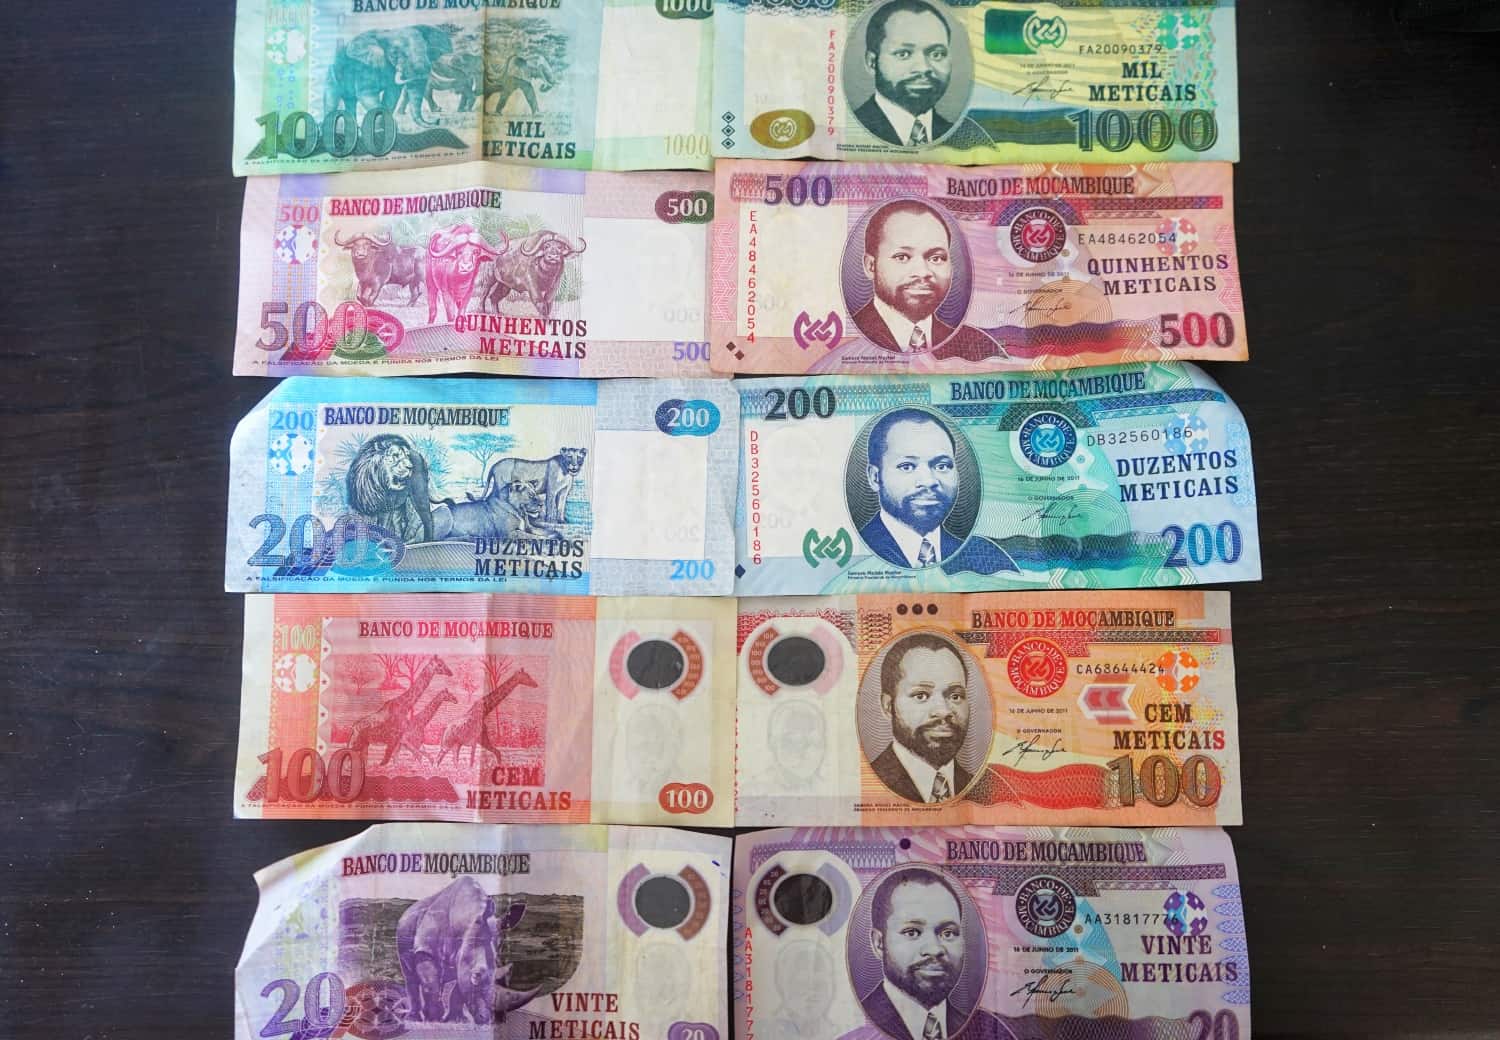 Mozambican metacais currency